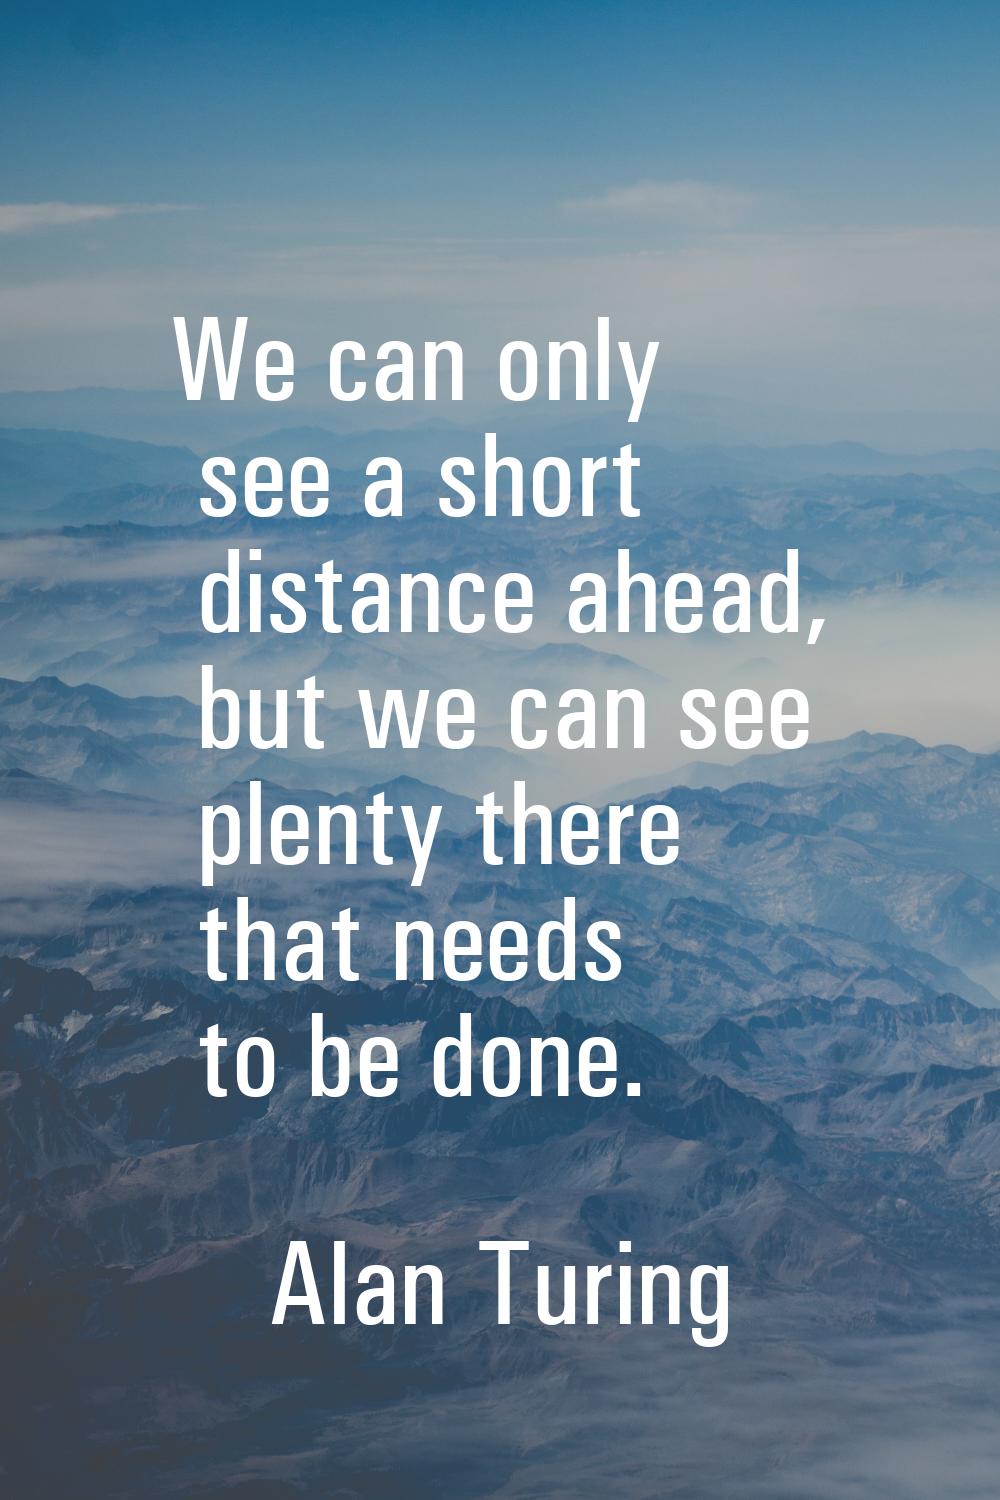 We can only see a short distance ahead, but we can see plenty there that needs to be done.